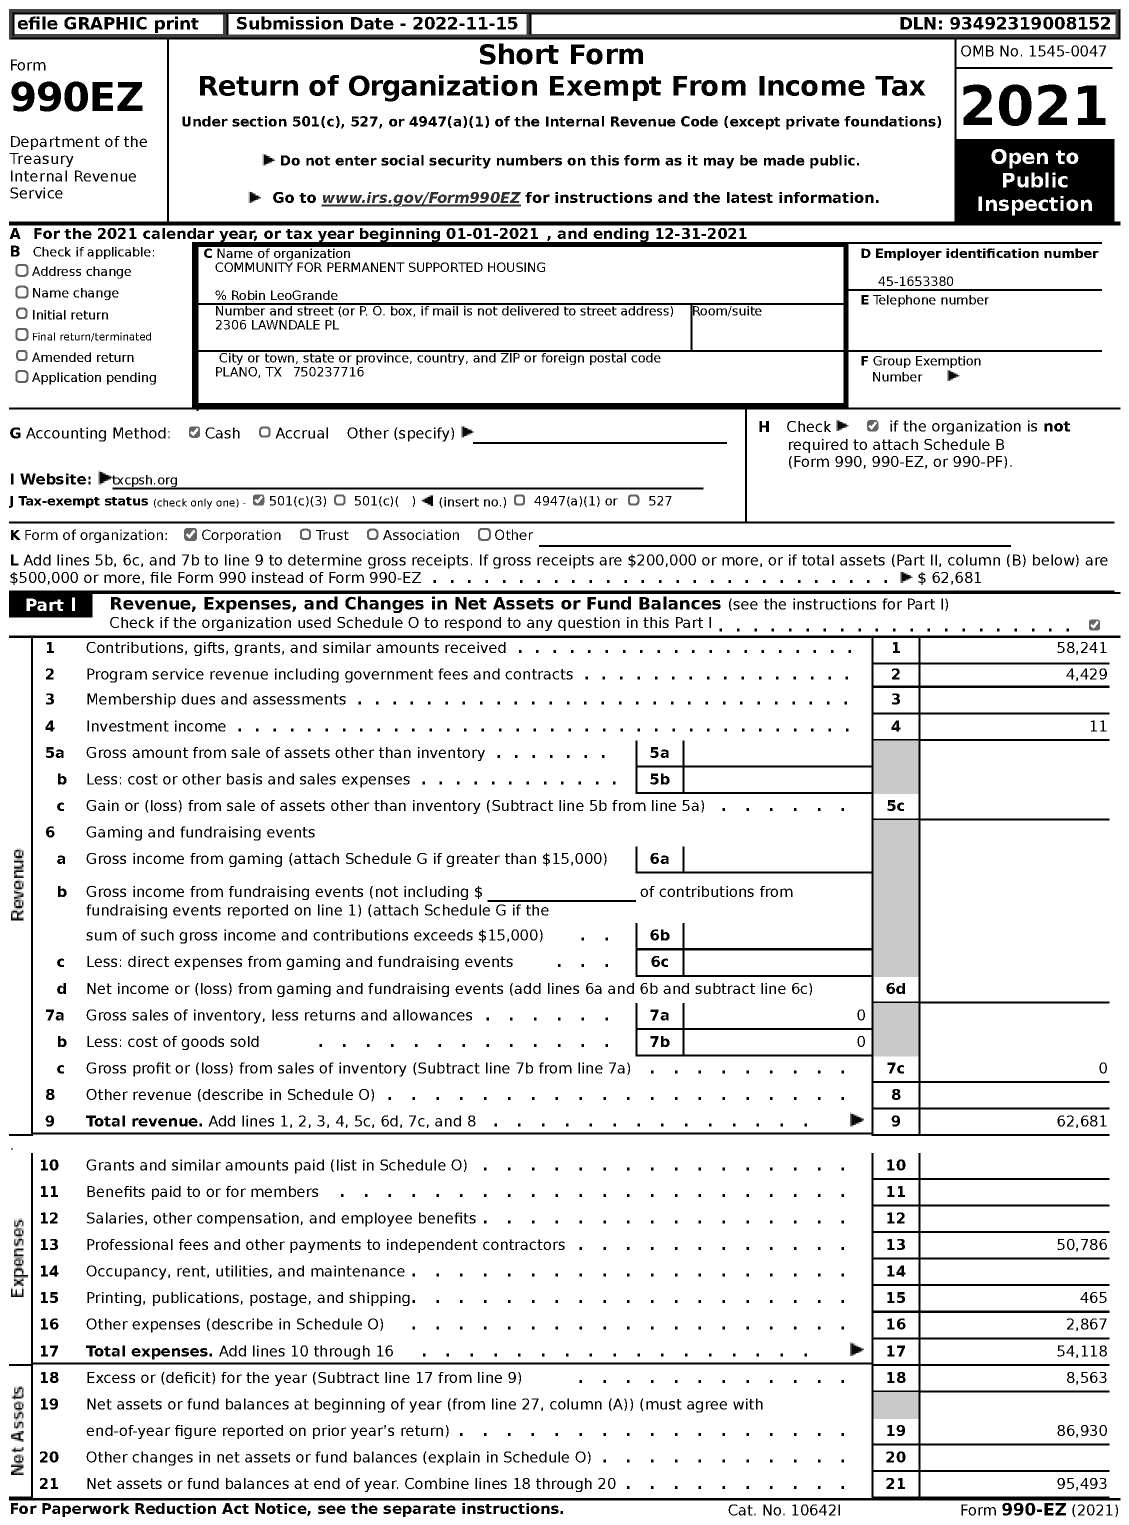 Image of first page of 2021 Form 990EZ for Community for Permanent Supported Housing (CPSH)